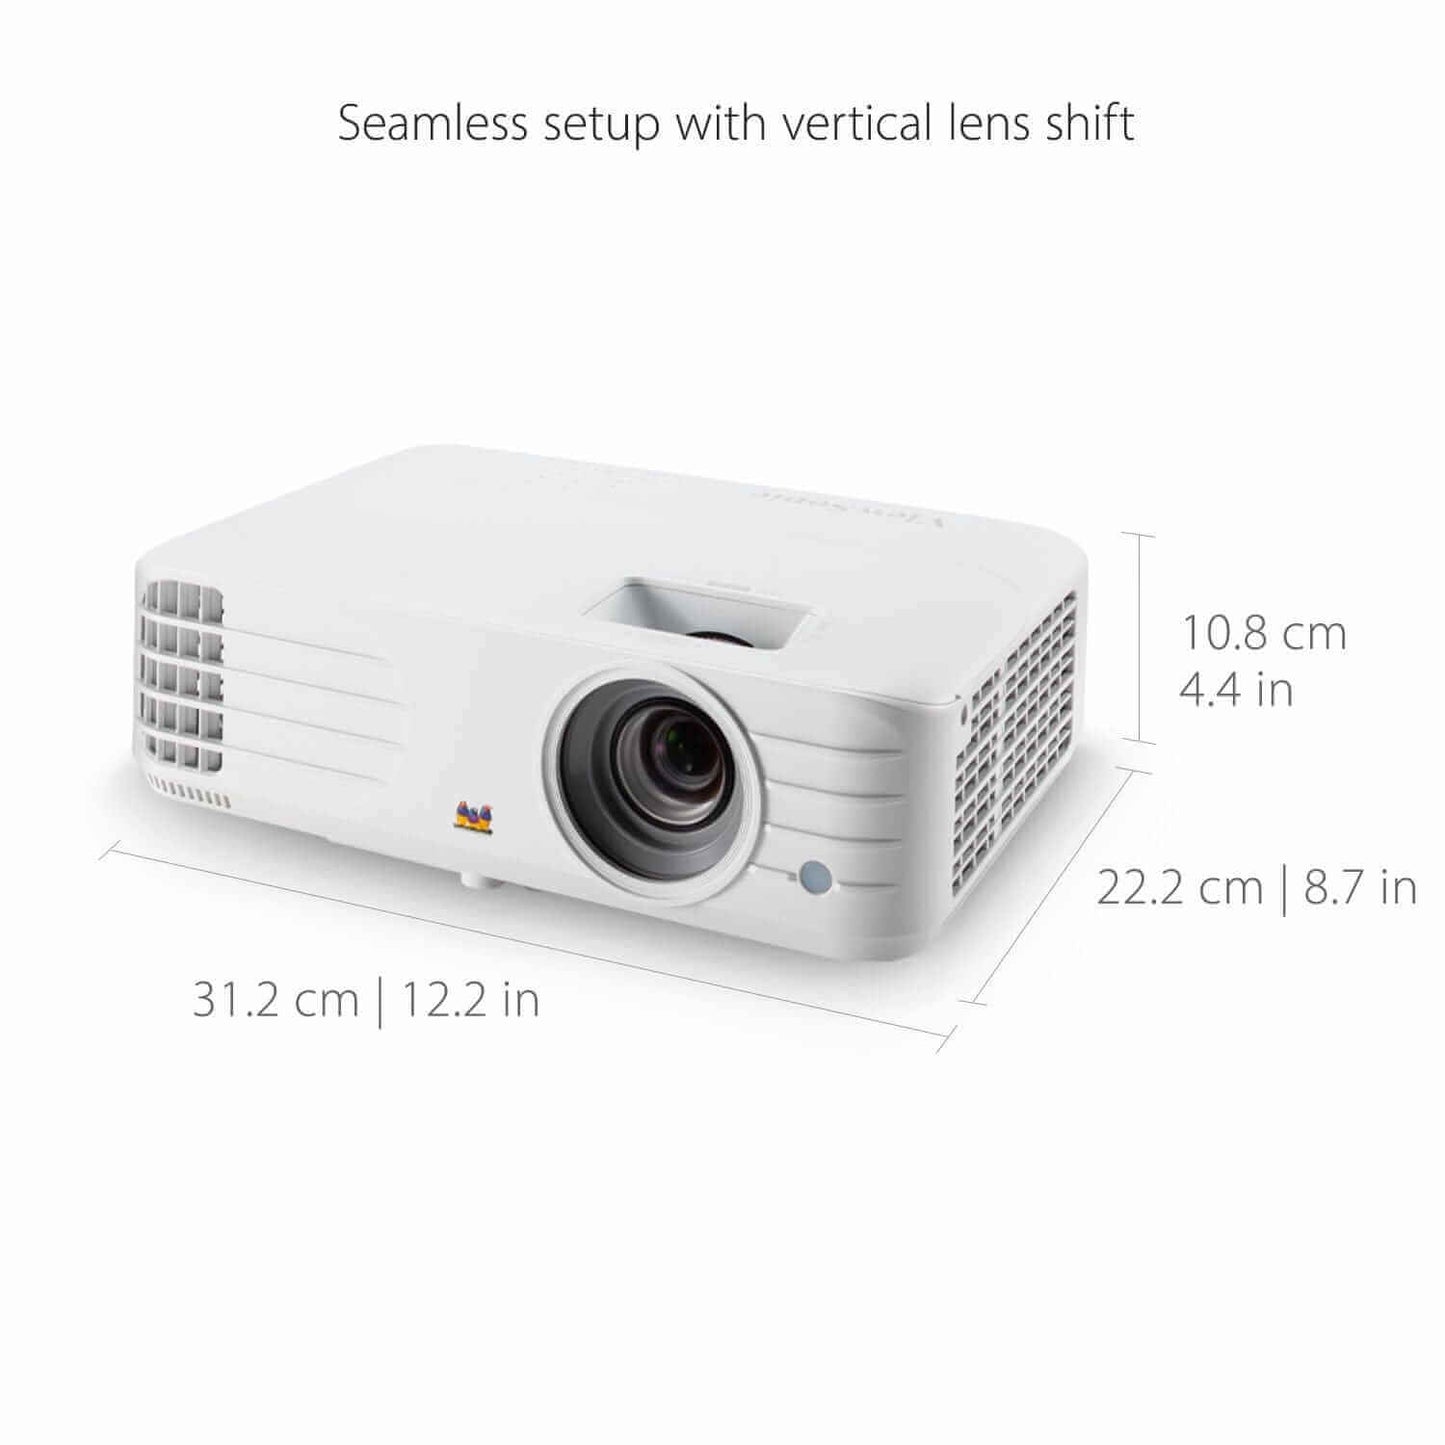 View Sonic PX701HDH 1080p Home Theater Projector with 3500 Lumens and Powered USB